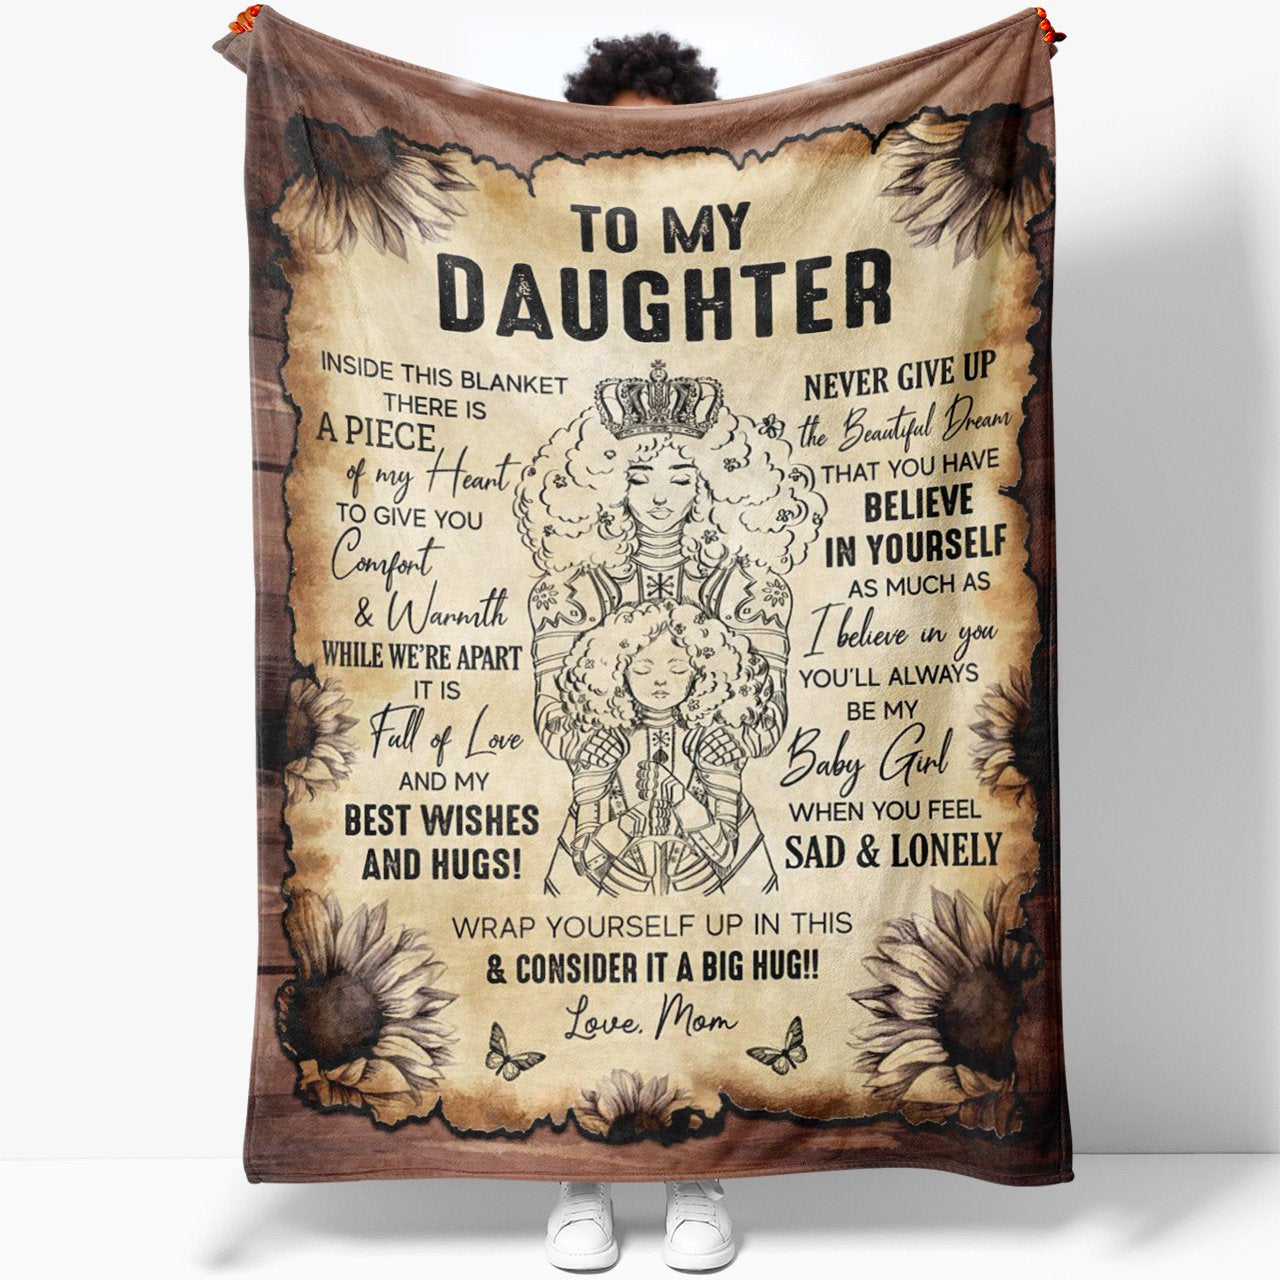 Blanket To My Daughter Gift, A Piece of My Heart Blanket for Black Girl, Valentines Day Gifts For Daughter, Christmas Birthday Gifts For My Daughter